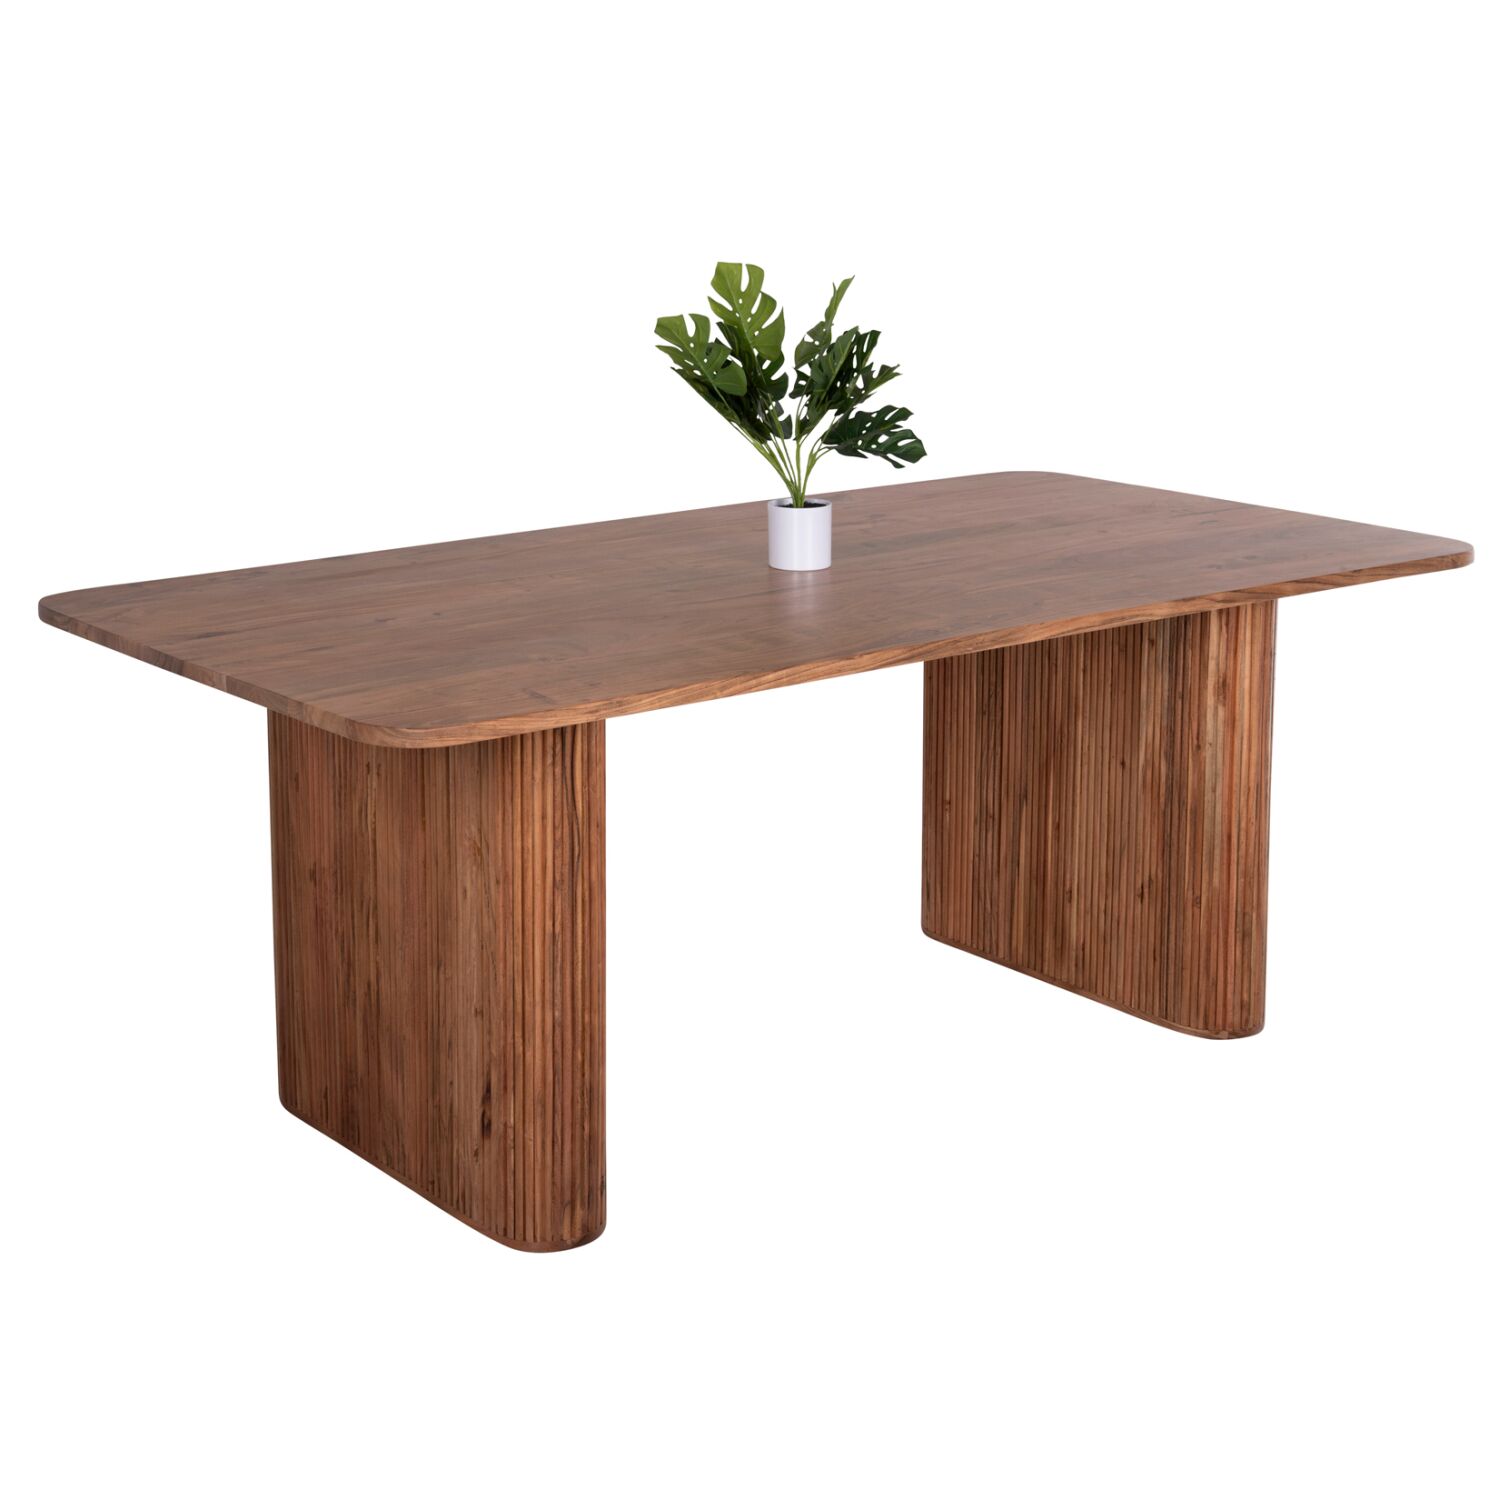 DINING TABLE GROOT HM9683 SOLID ACACIA WOOD IN NATURAL 200,5x100x72Hcm.